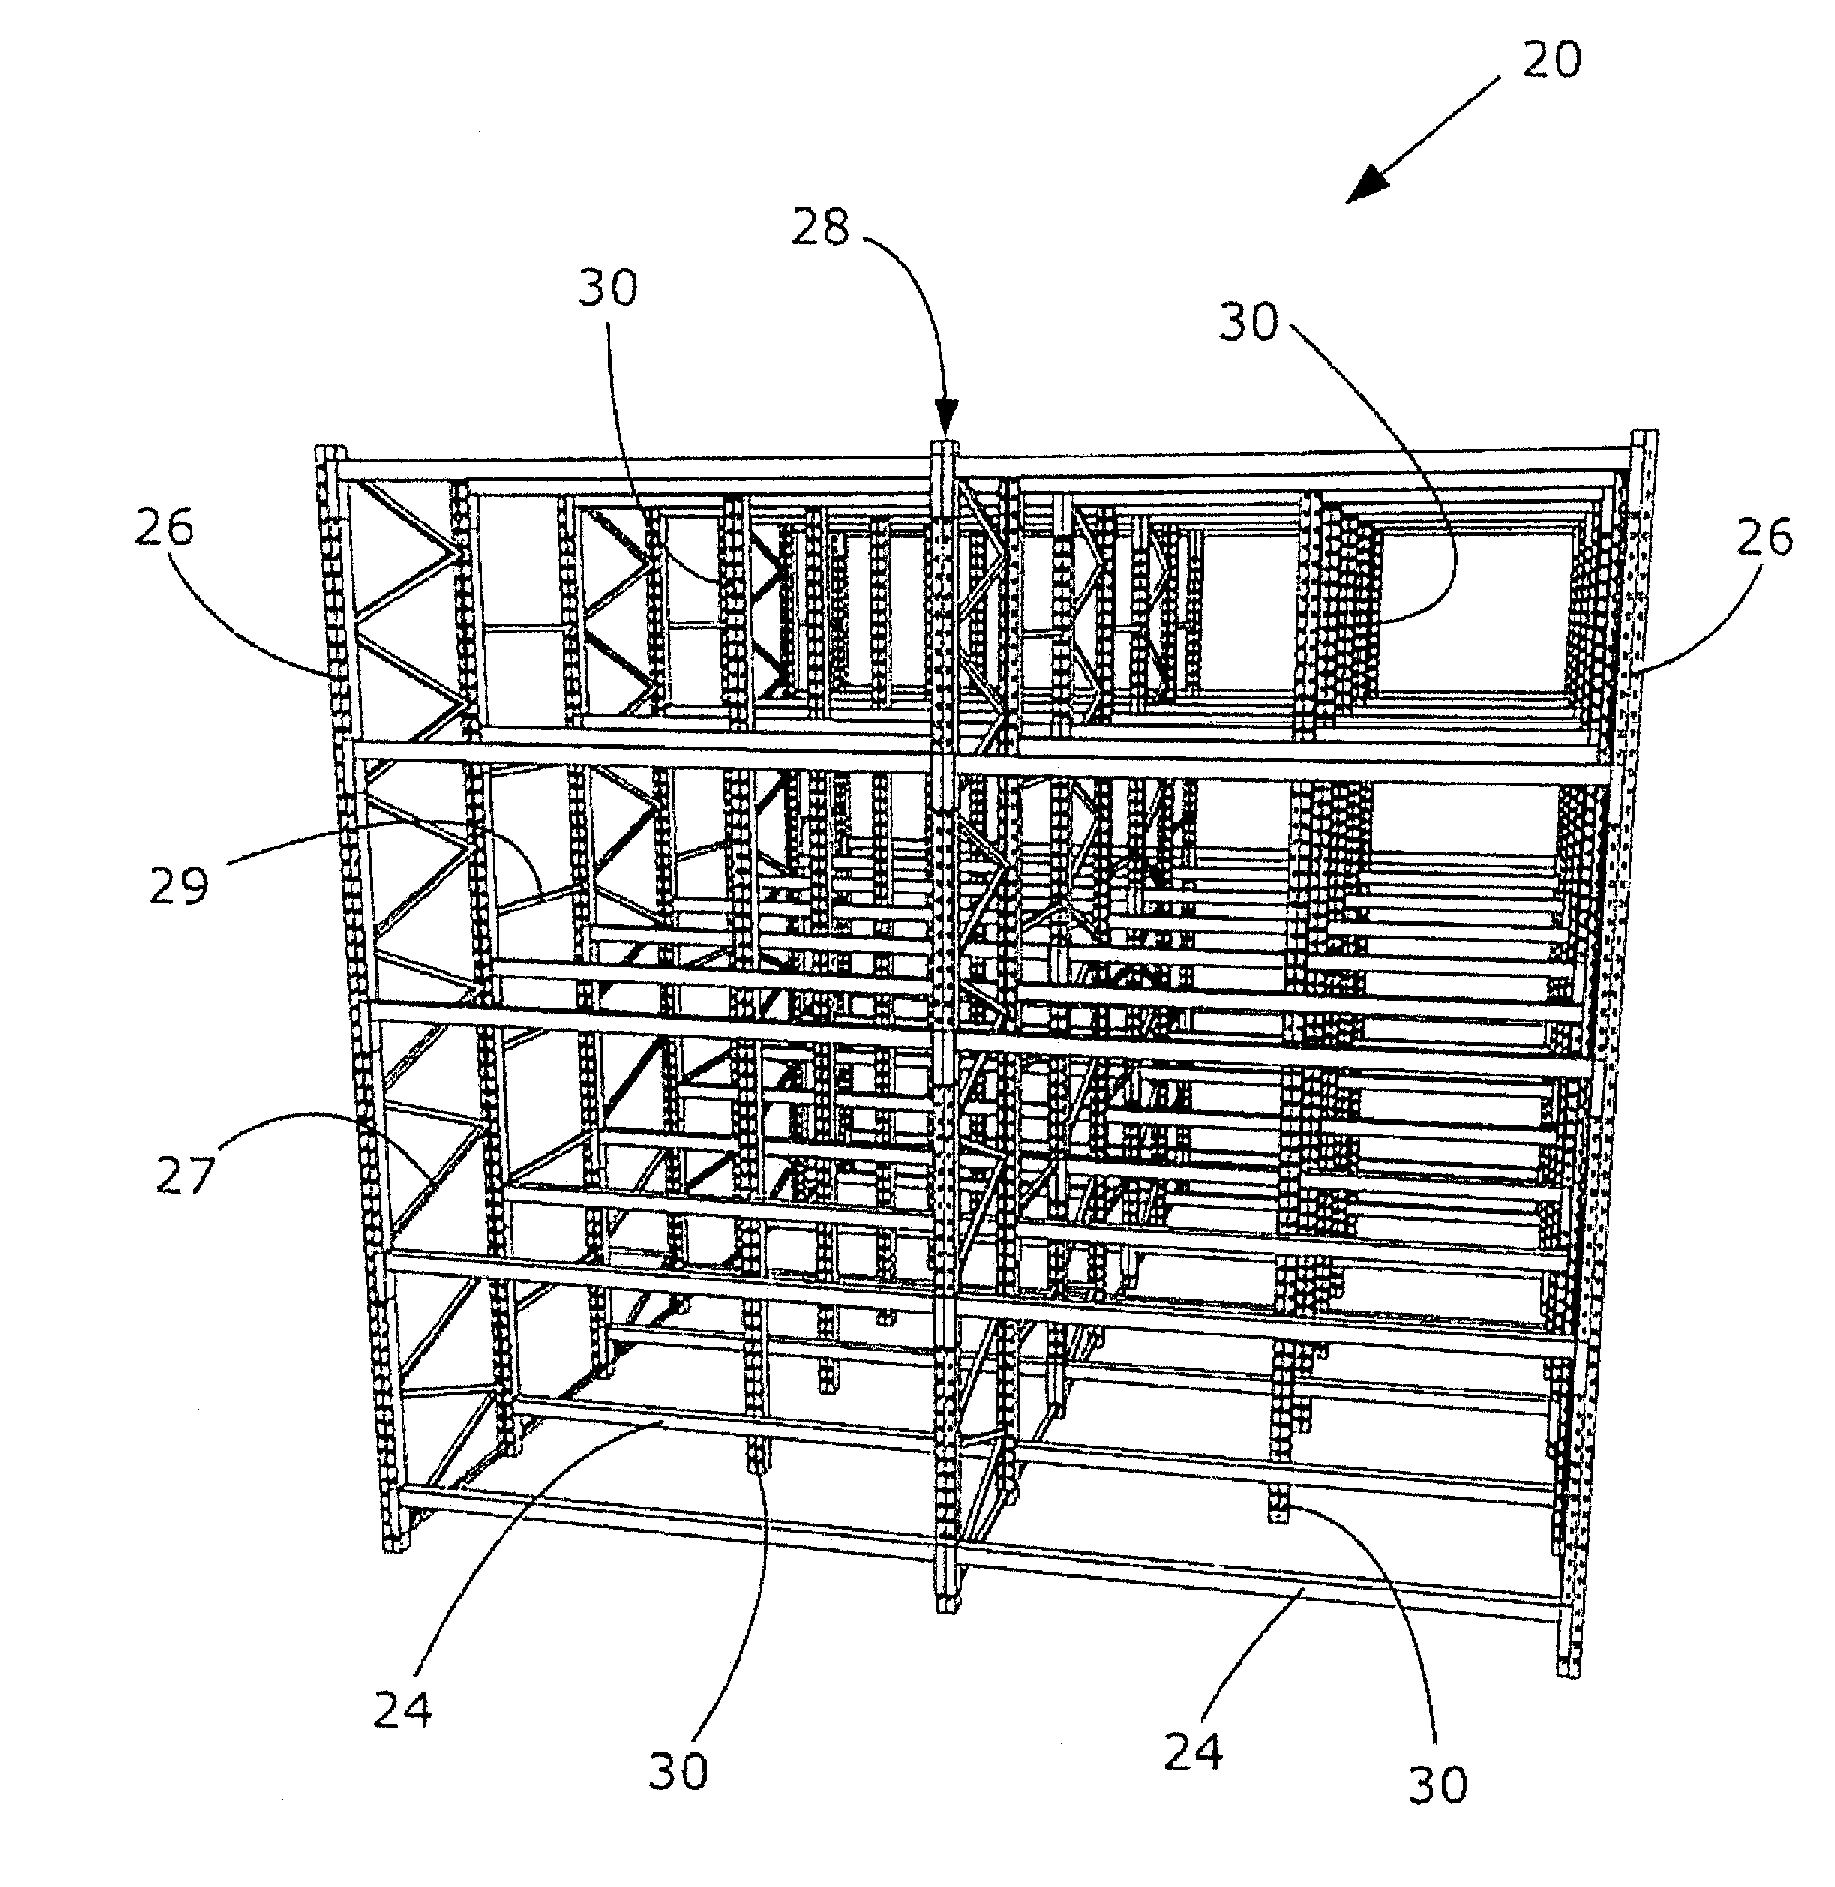 Upright support configuration for a pallet racking system